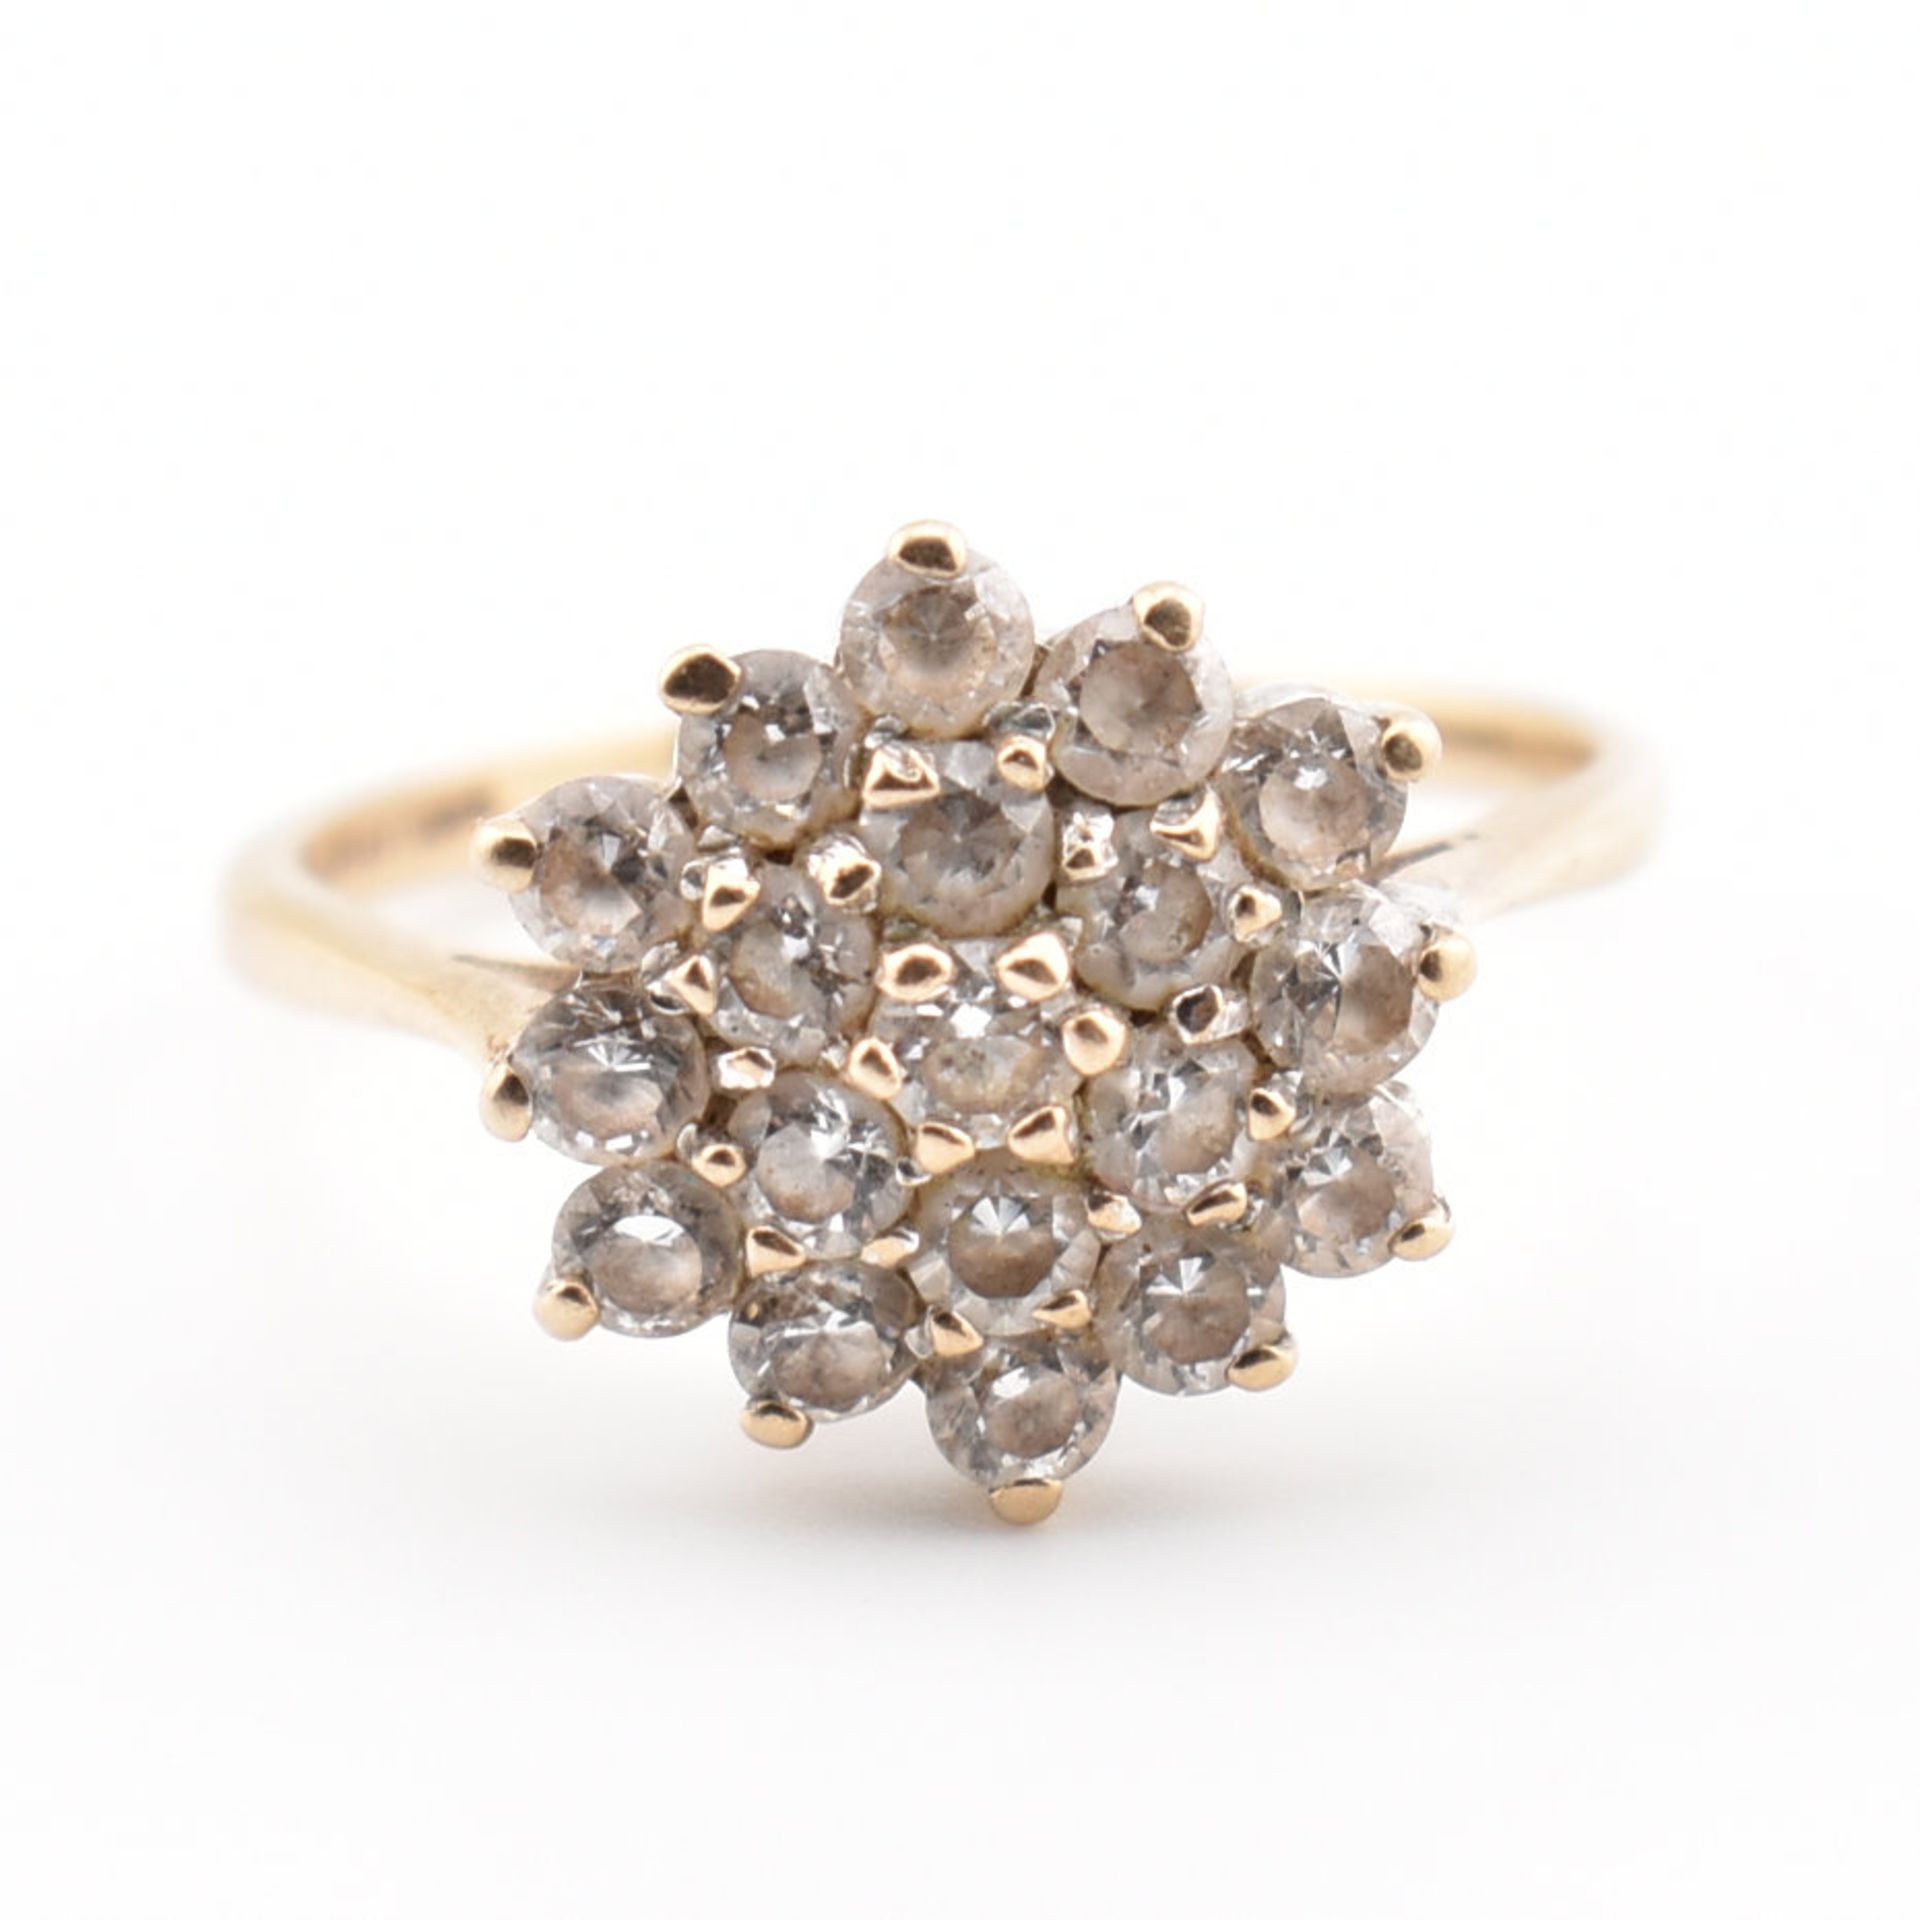 HALLMARKED 9CT GOLD & WHITE STONE CLUSTER RING - Image 2 of 8